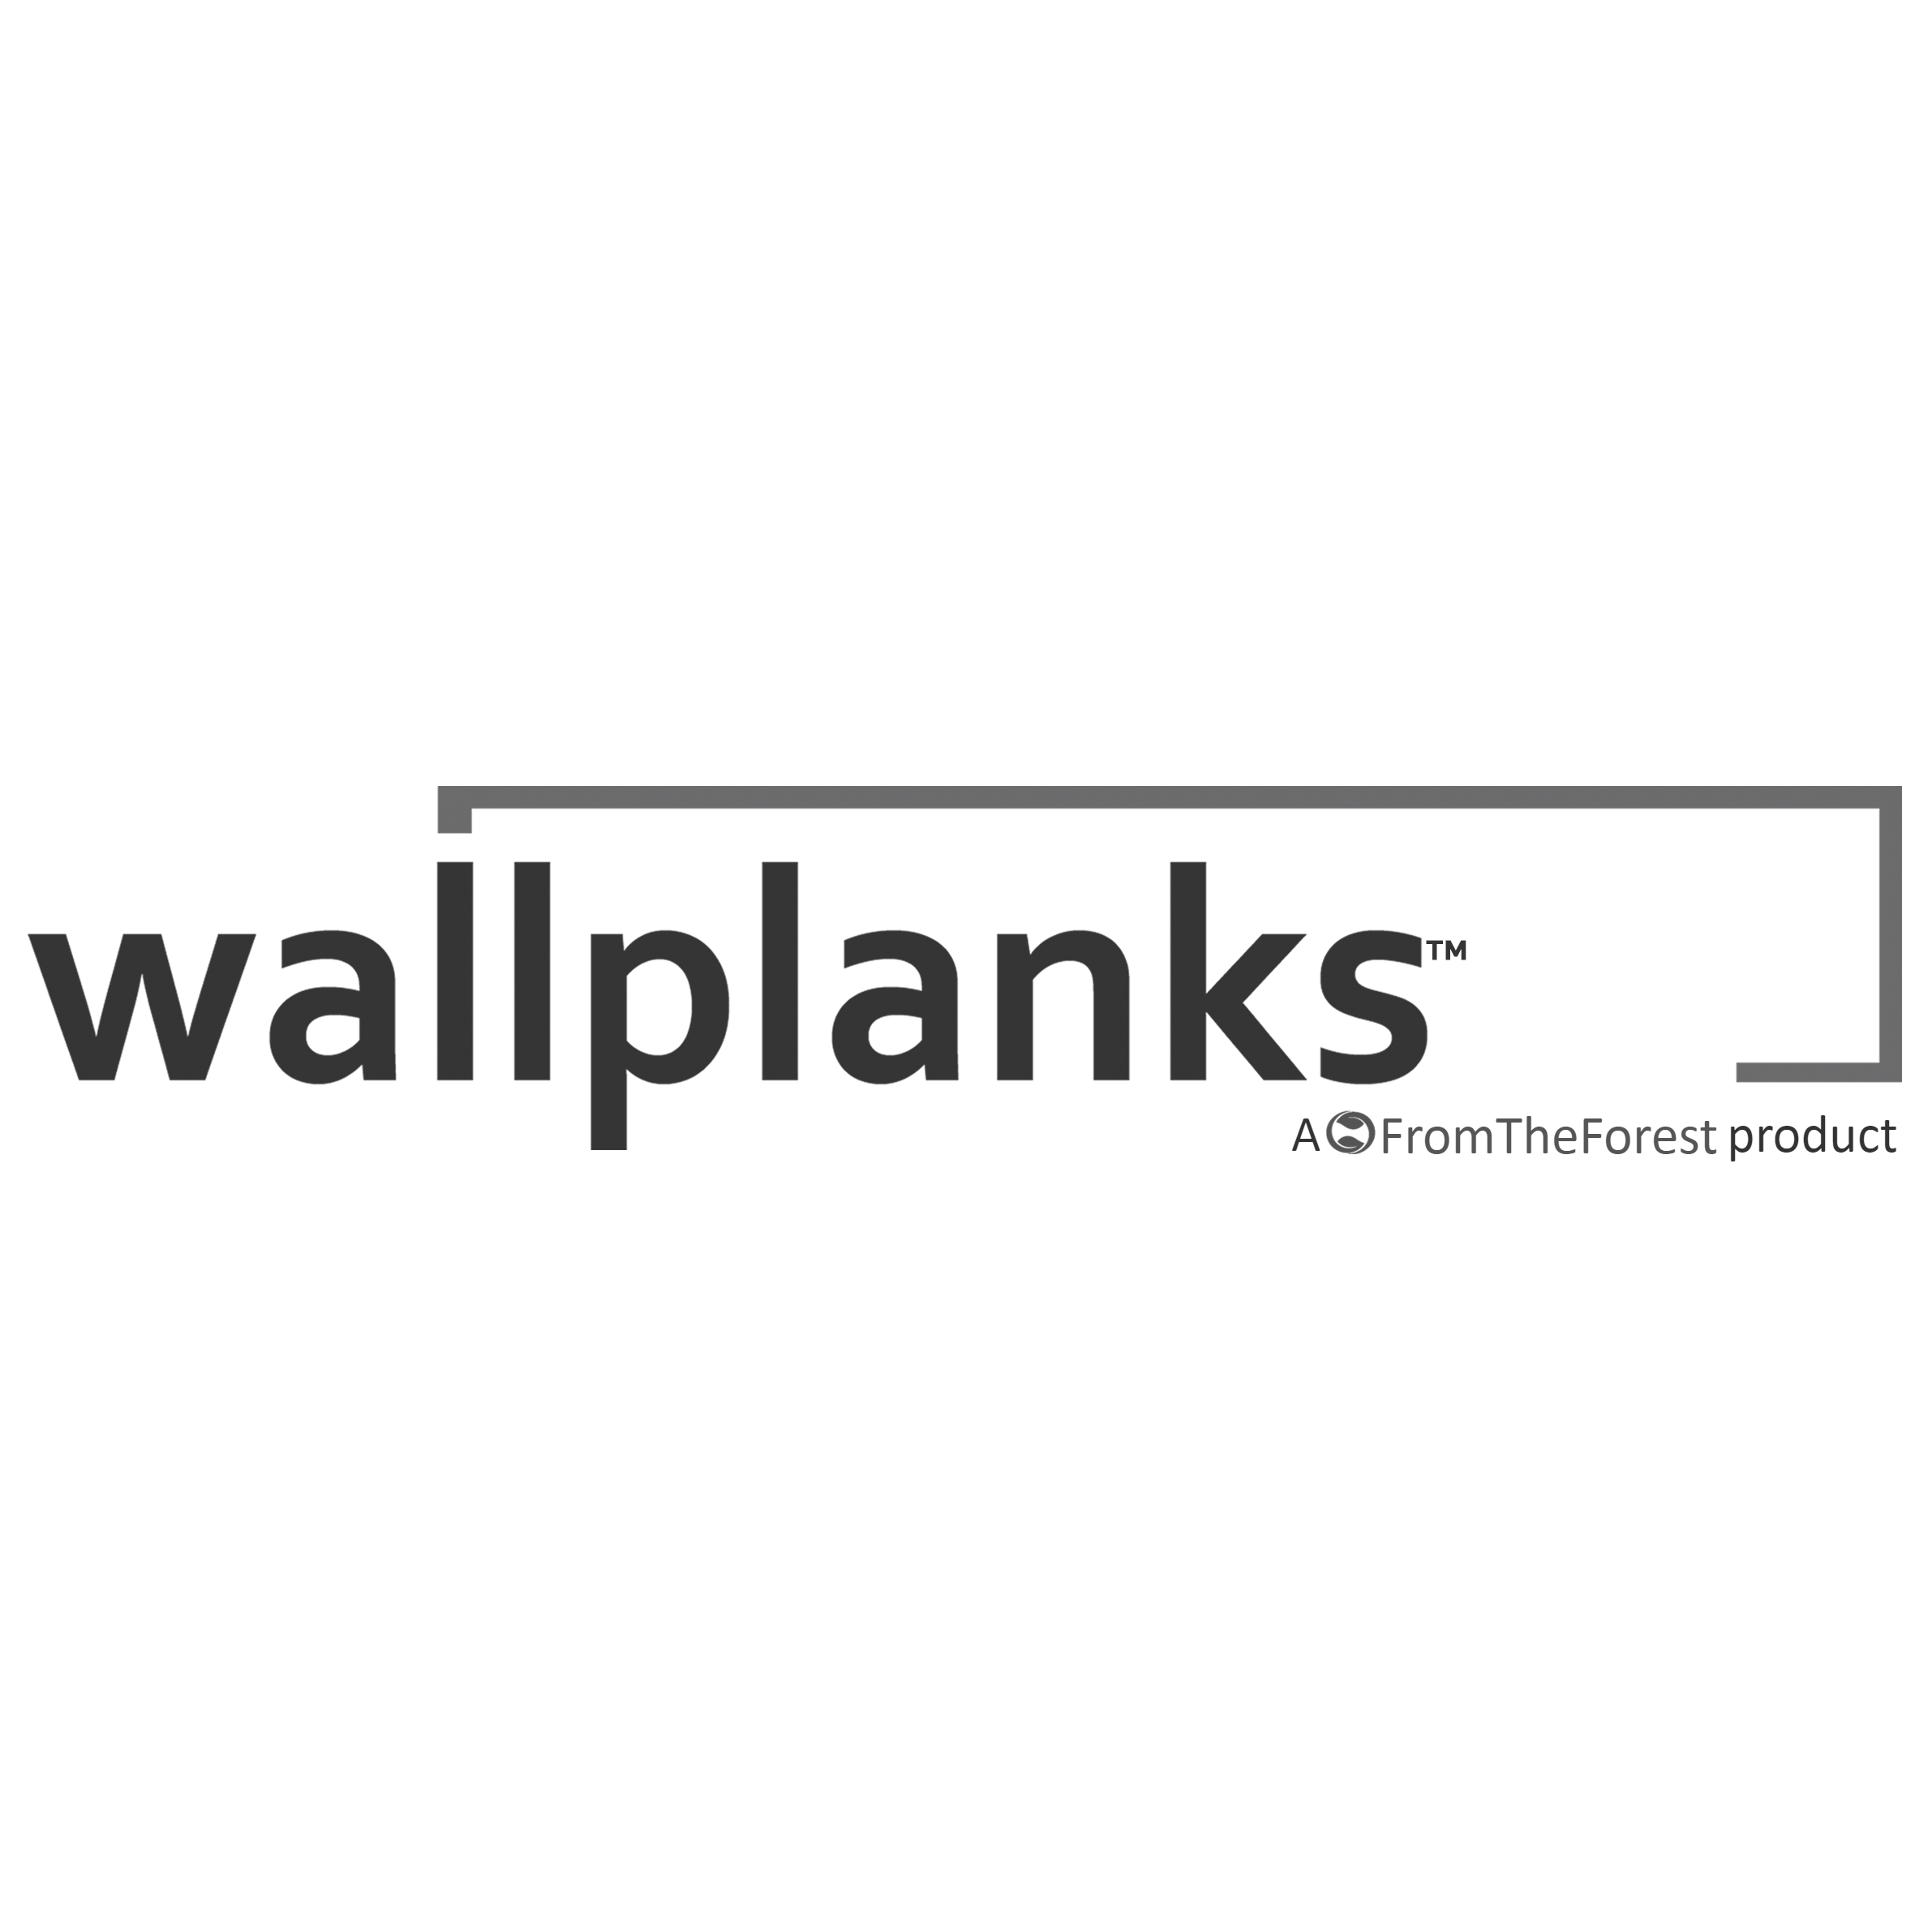 Wallplanks - a From The Forest Product Logo